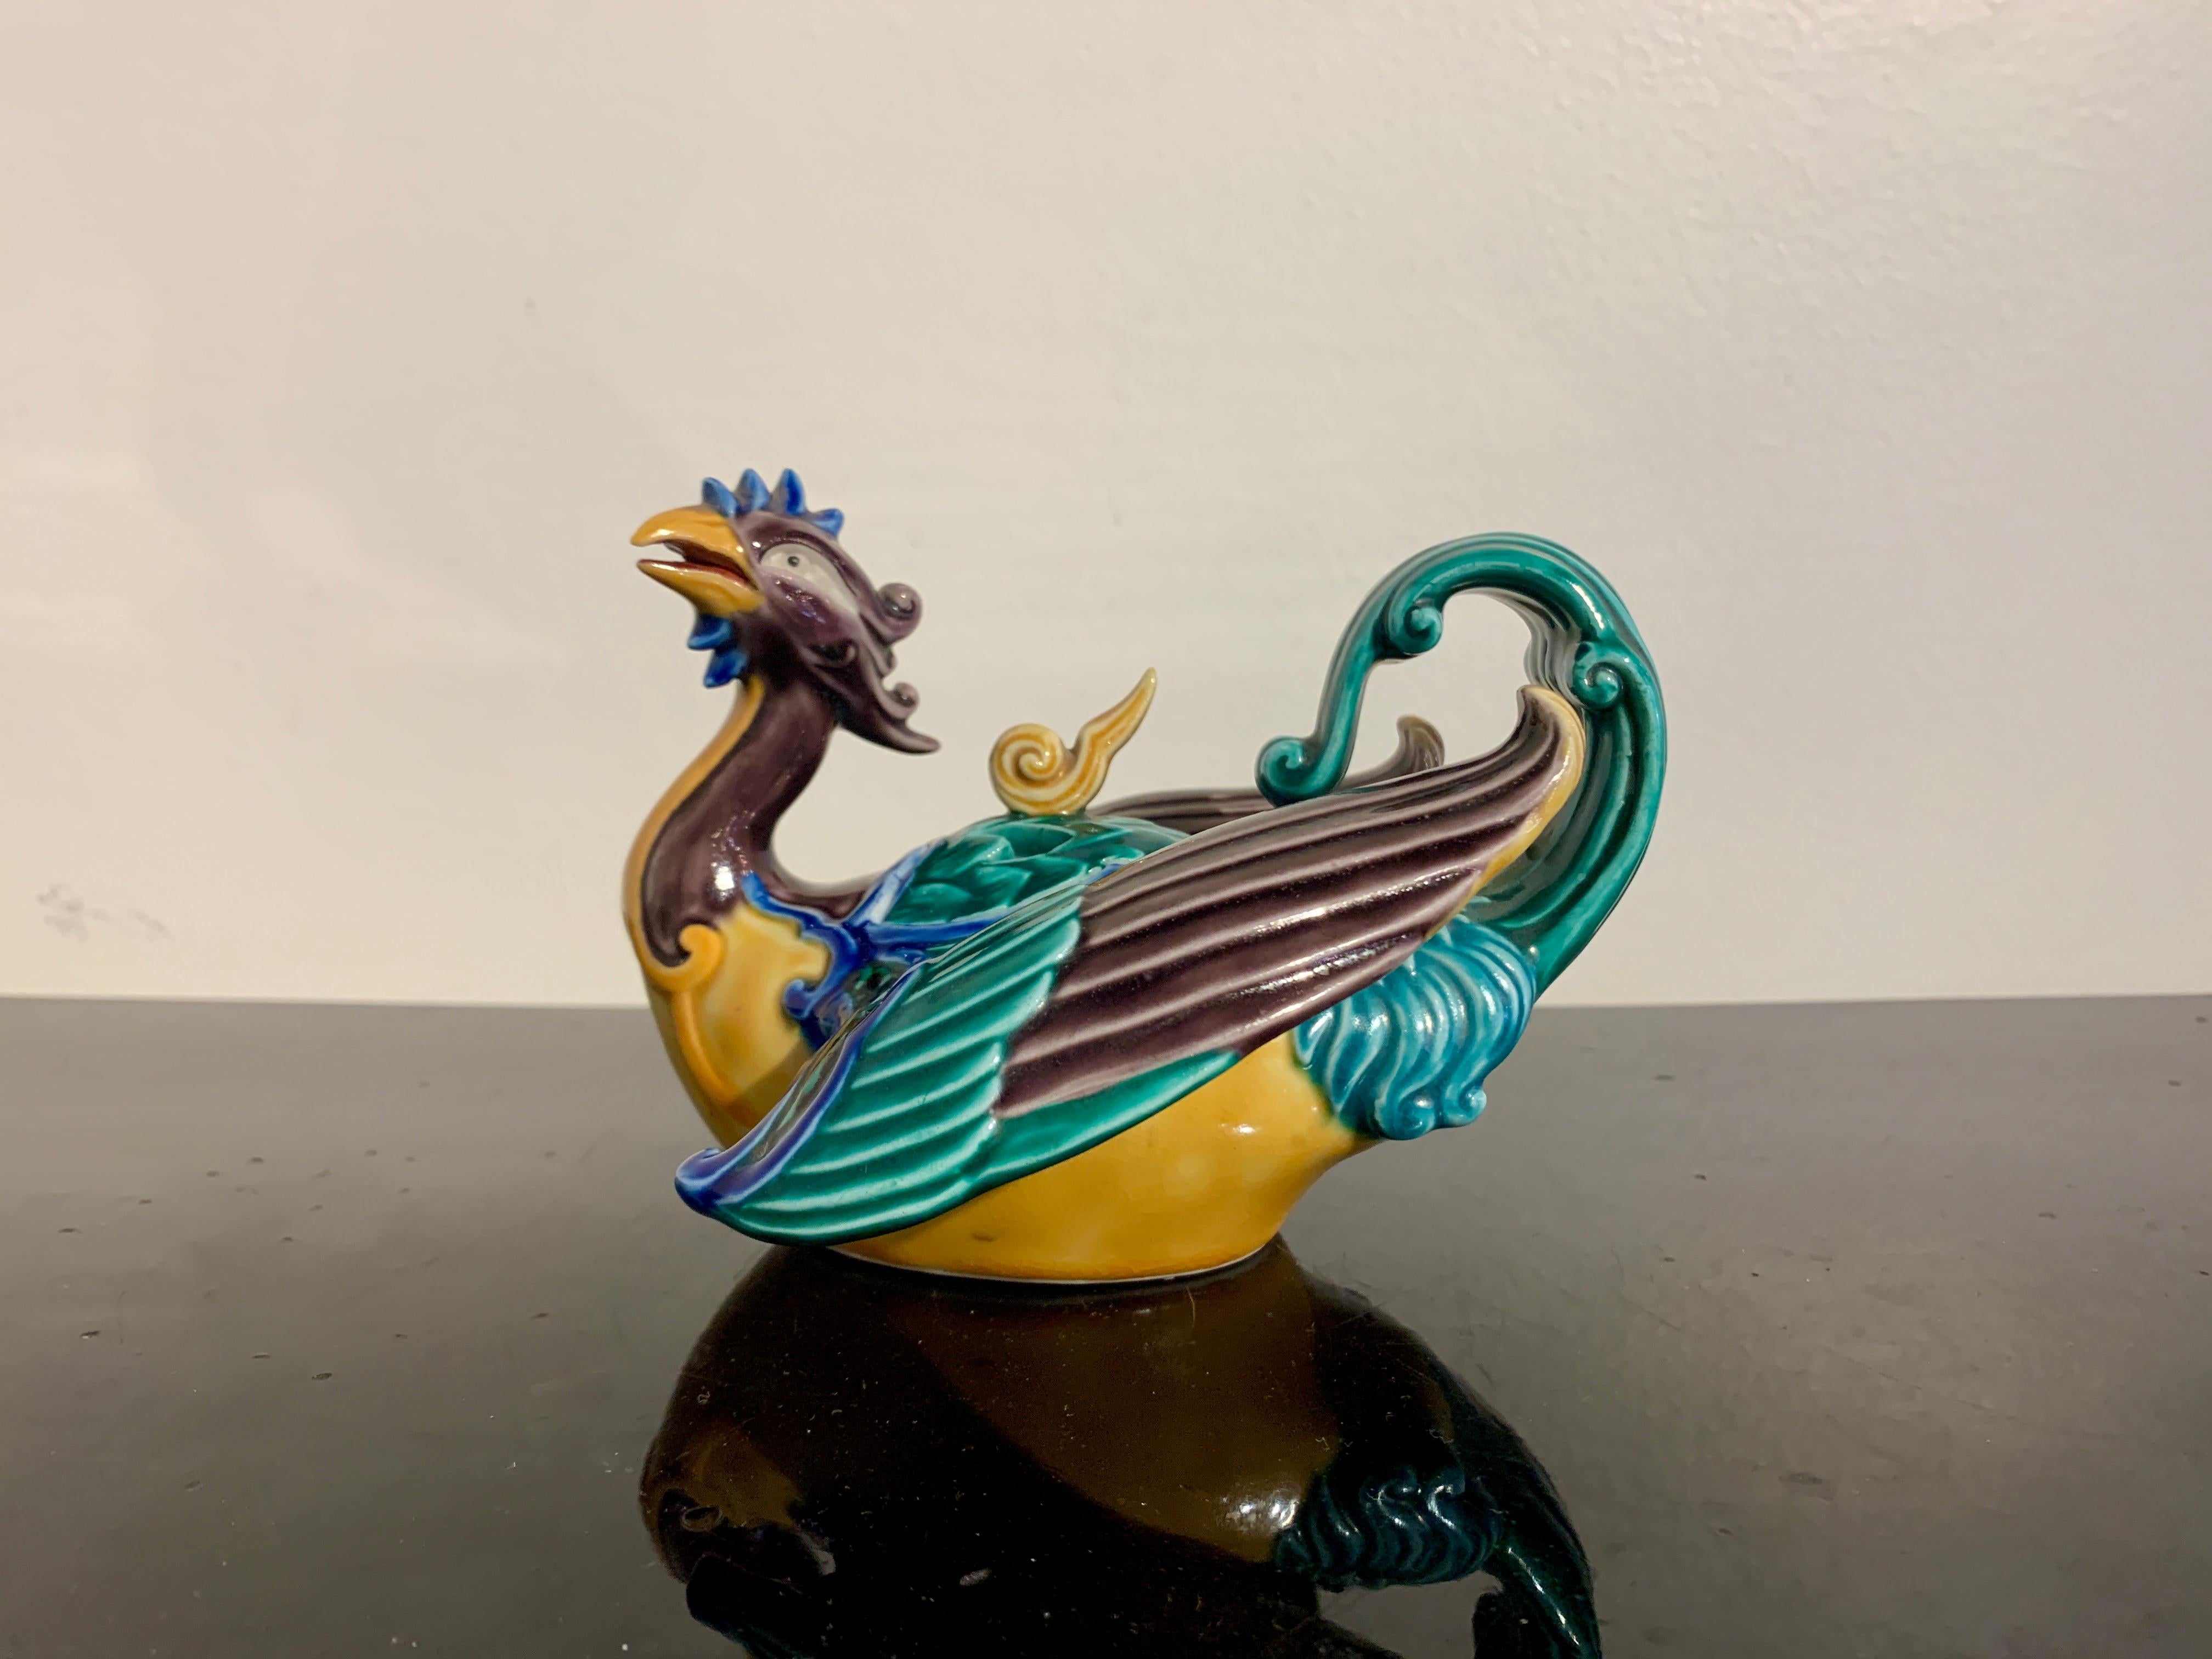 A fantastic Japanese Aote type Kutani incense burner, koro, in the form a phoenix, Showa era, circa 1930's, Japan.

The censer, koro, gracefully modeled as a phoenix in flight, and glazed in bold and bright green, yellow, aubergine and blue